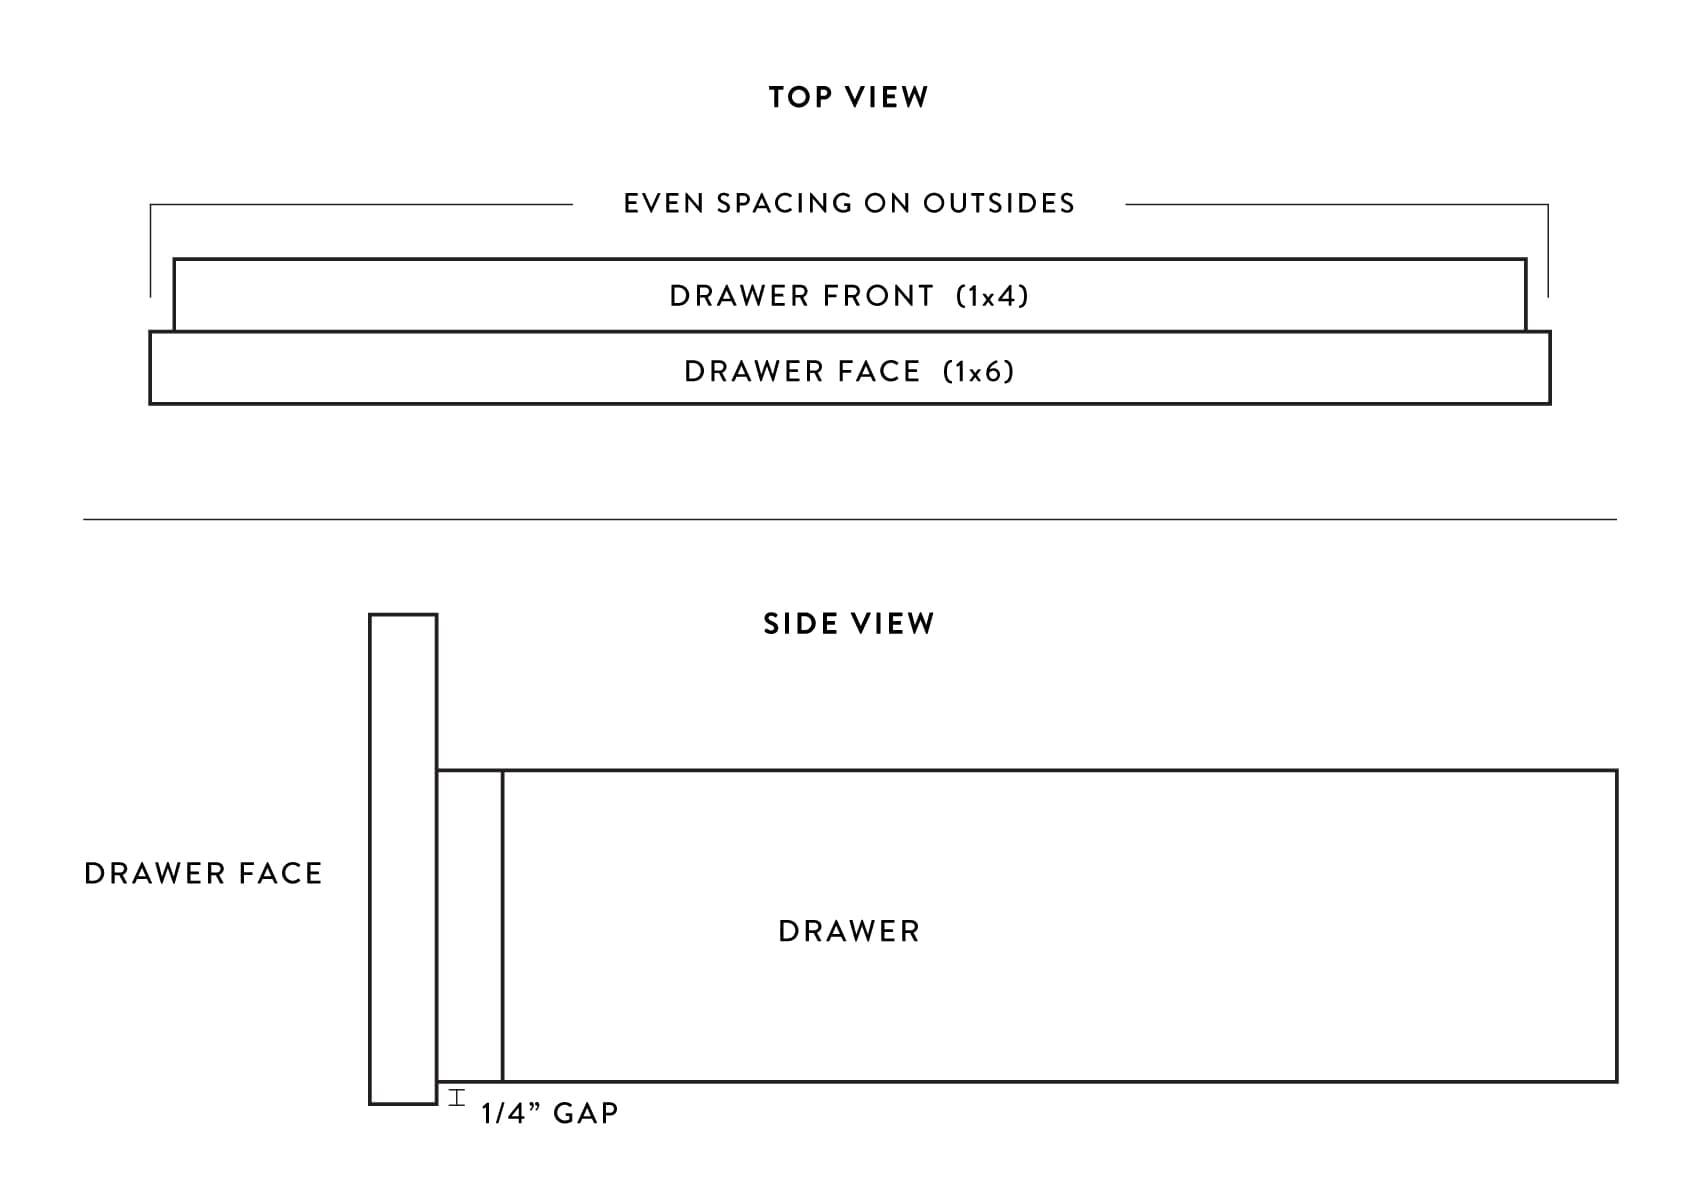 Diagram of drawer front face